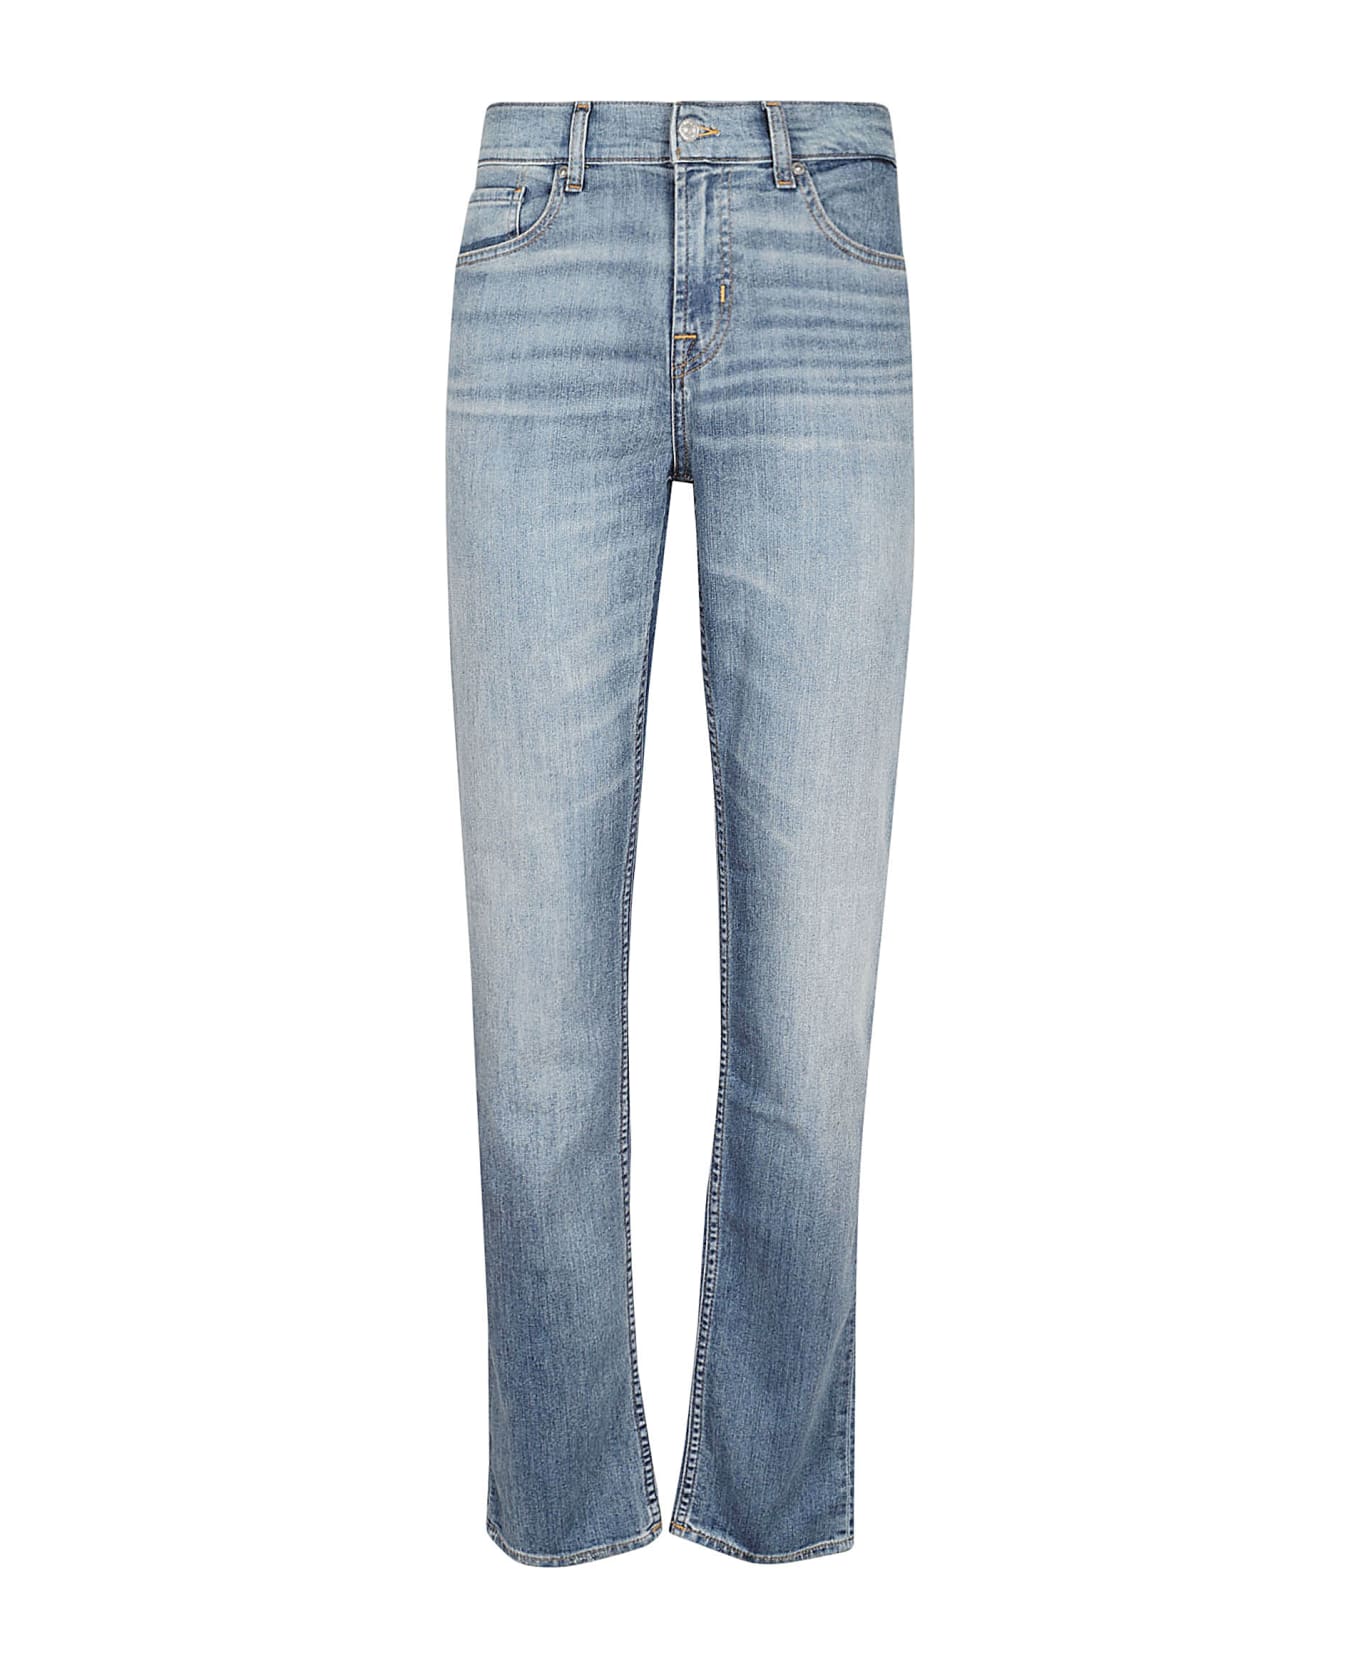 7 For All Mankind Slimmy Xl Momentum - Light Blue